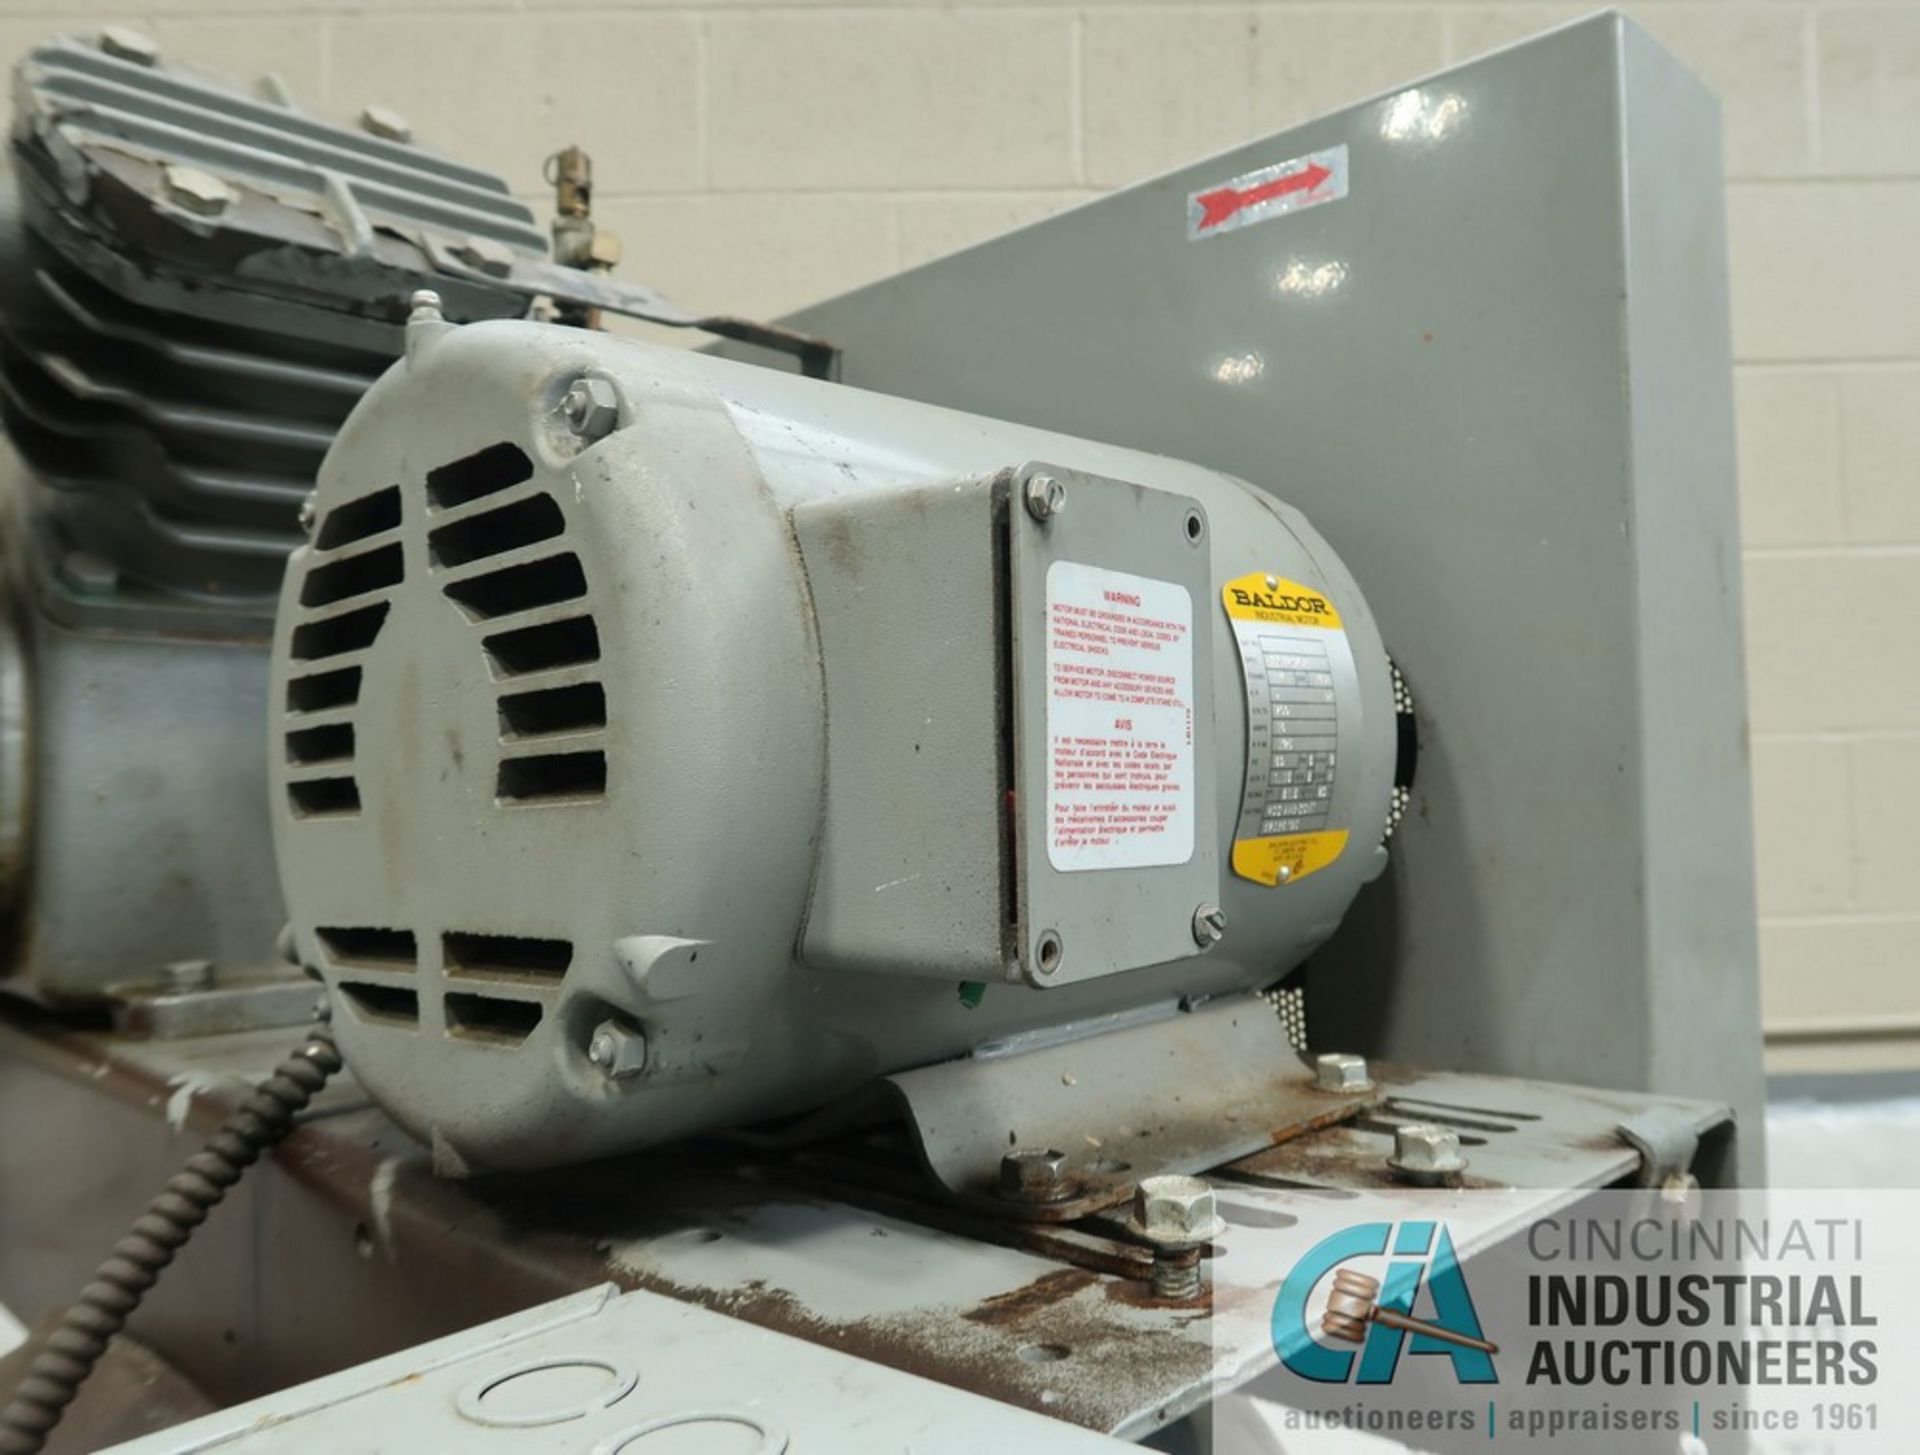 INGERSOLL RAND MODEL T30 VERTICAL TANK AIR COMPRESSOR; S/N 30T-693099, 3-PHASE, 200 VOLTS, 5 HP - Image 7 of 9